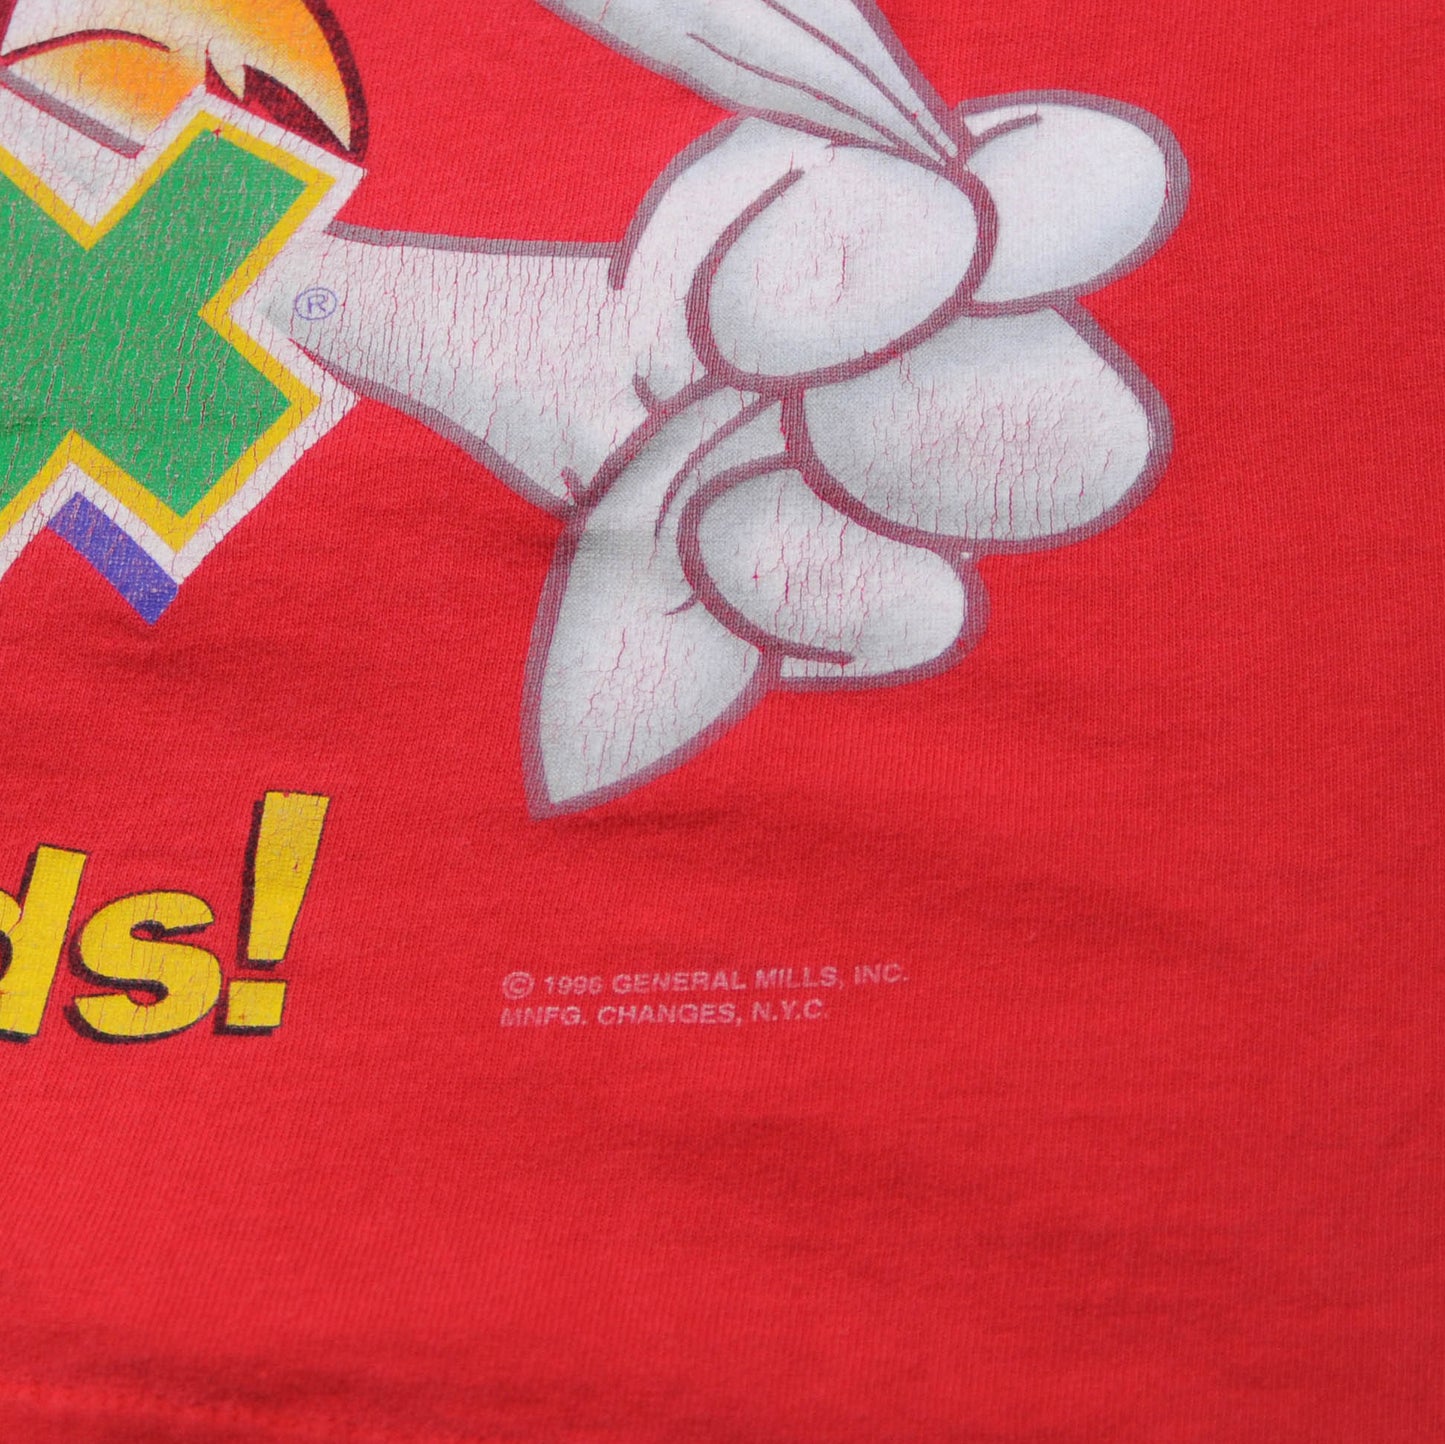 90's Trix Are for kids! シリアル企業Tシャツ　(L)/A2968T-S